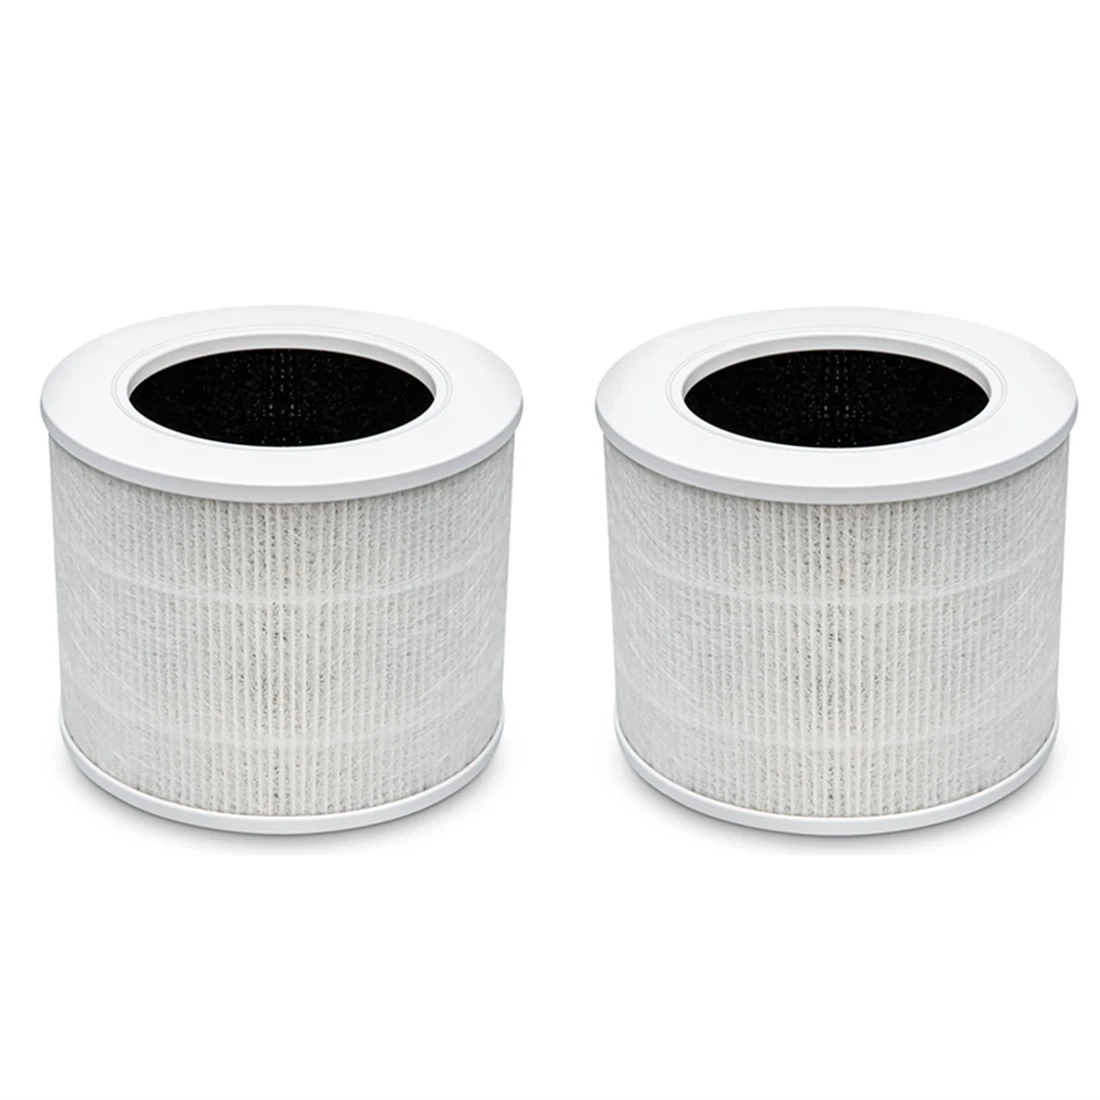 

2Pcs Replacement Filter for LEVOIT Air Purifier Core Mini Part Core Mini-RF,H13 HEPA Filter 3In1 Activated Carbon Filter